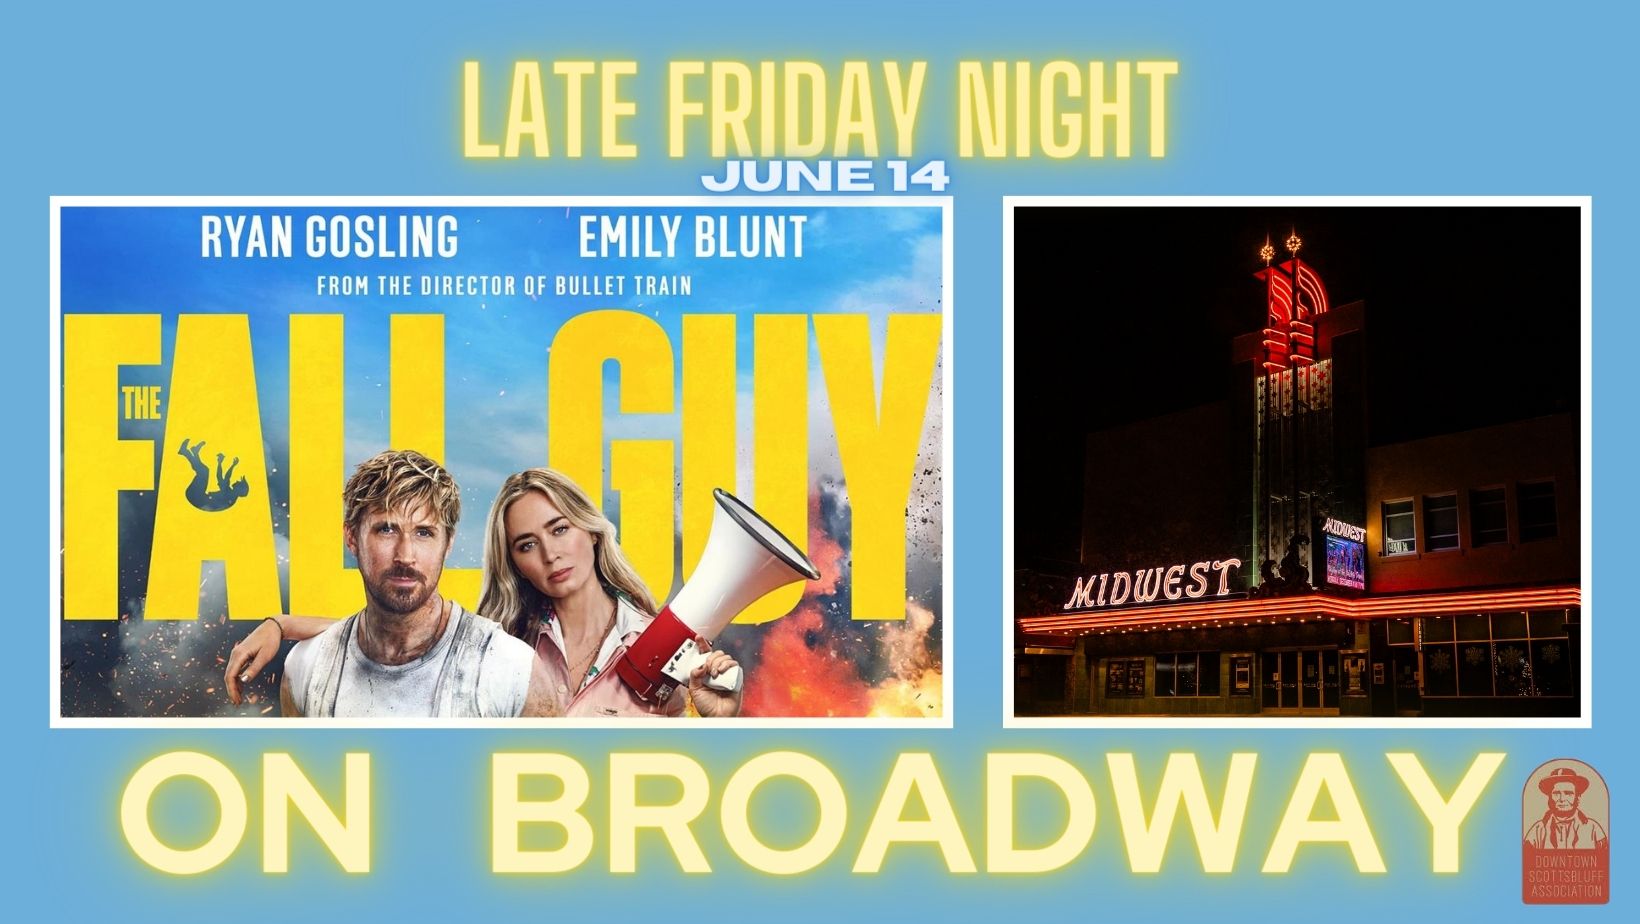 Event Promo Photo For Late Night on Broadway